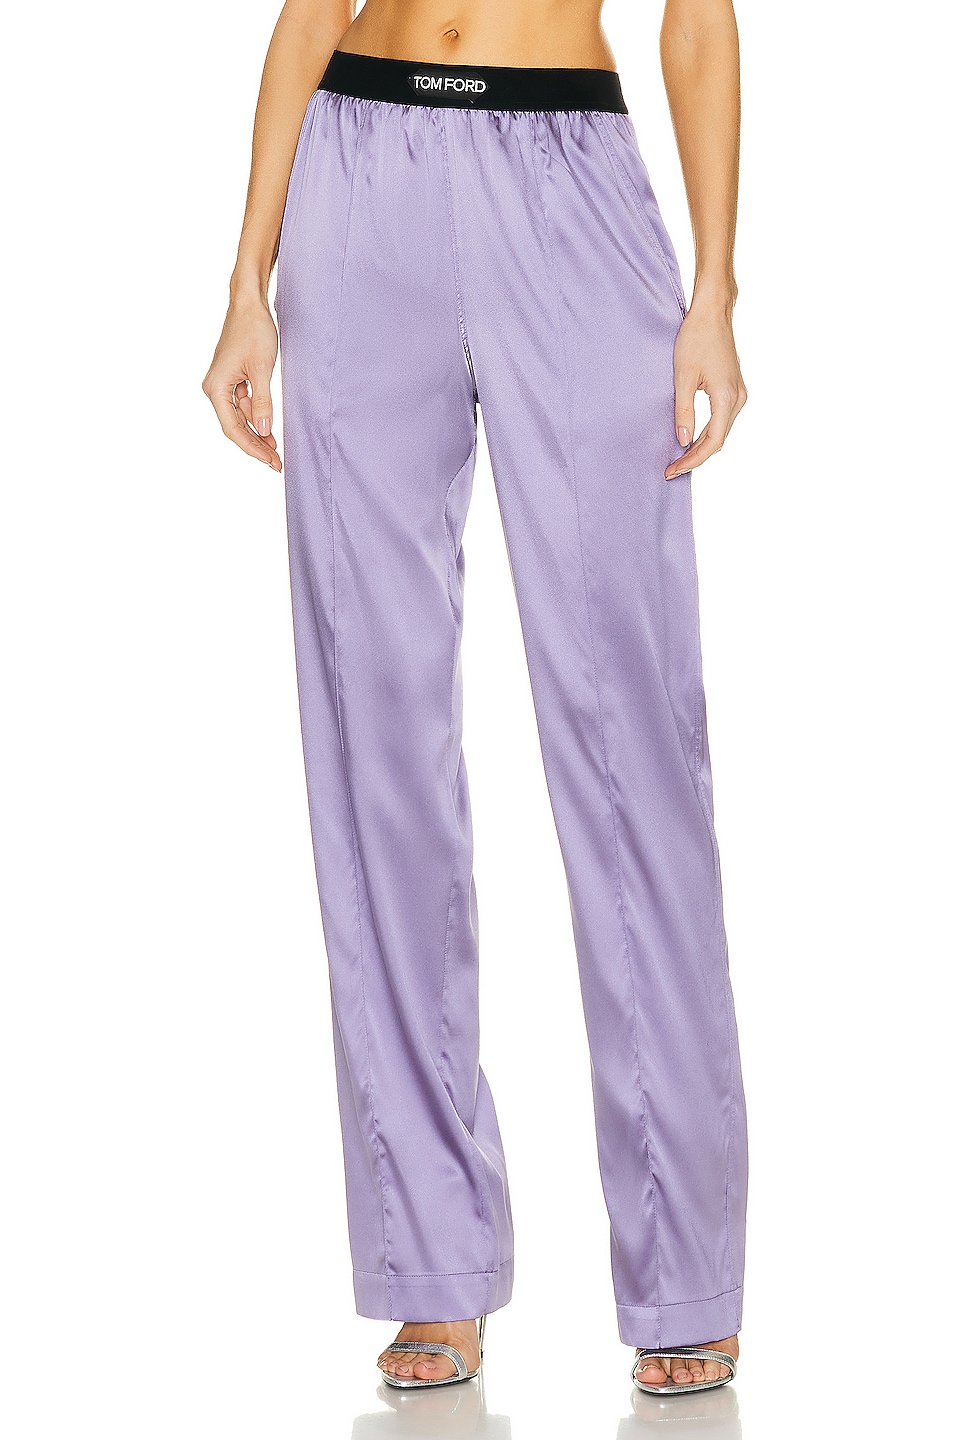 Image 1 of TOM FORD Satin Pant in Pale Parma Violet